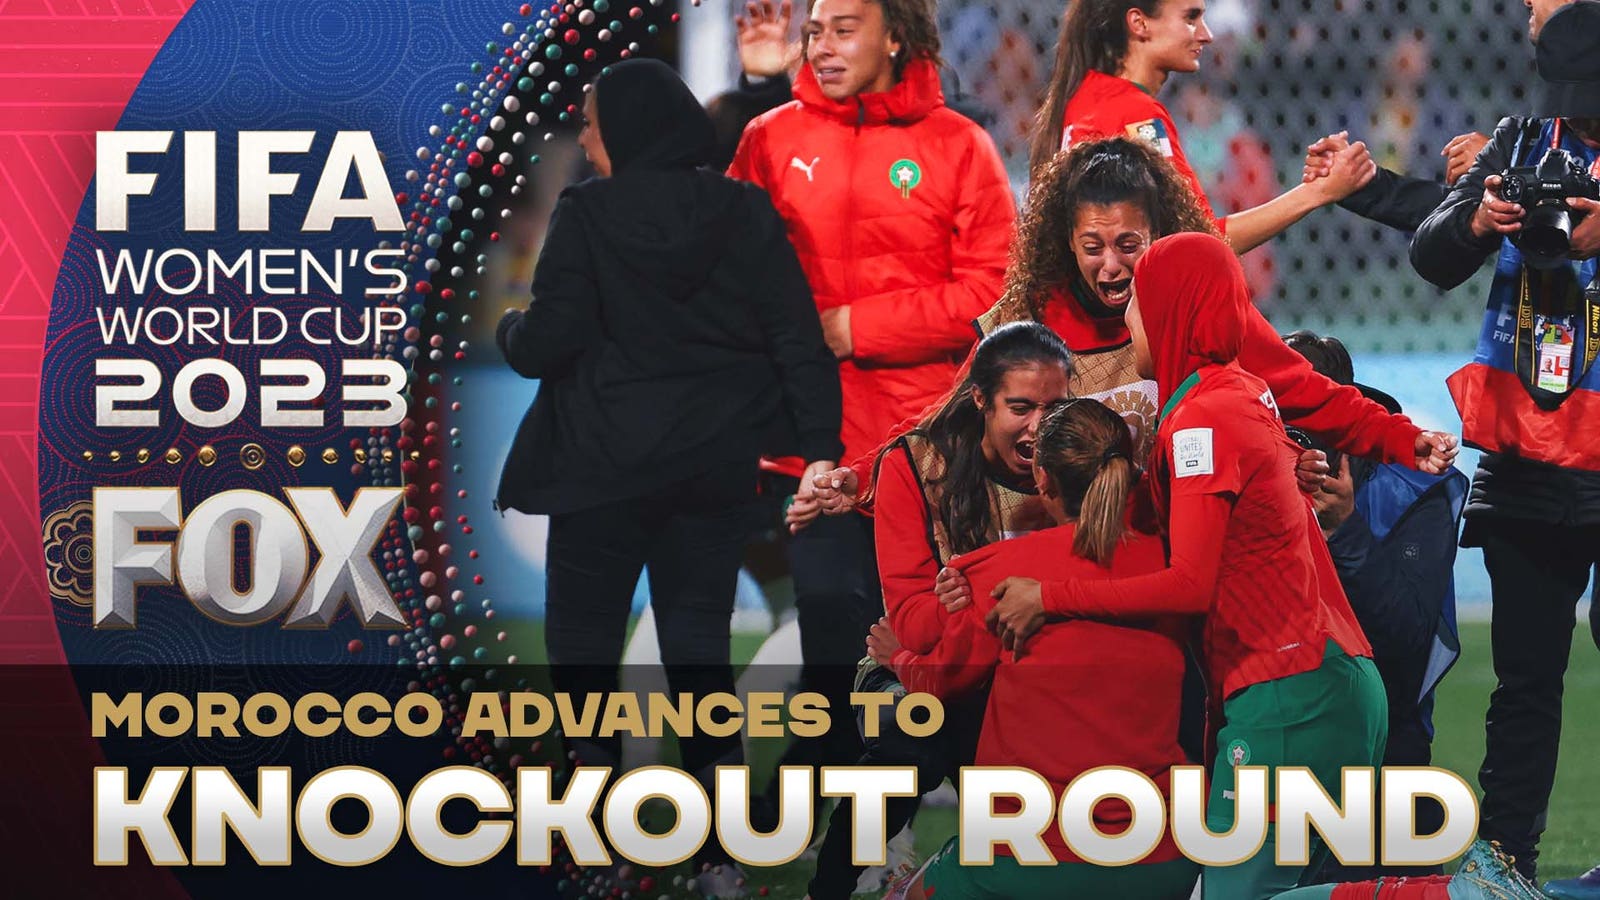 Morocco advances to knockout stage for first time in Women's World Cup history and the World Cup crew reacts